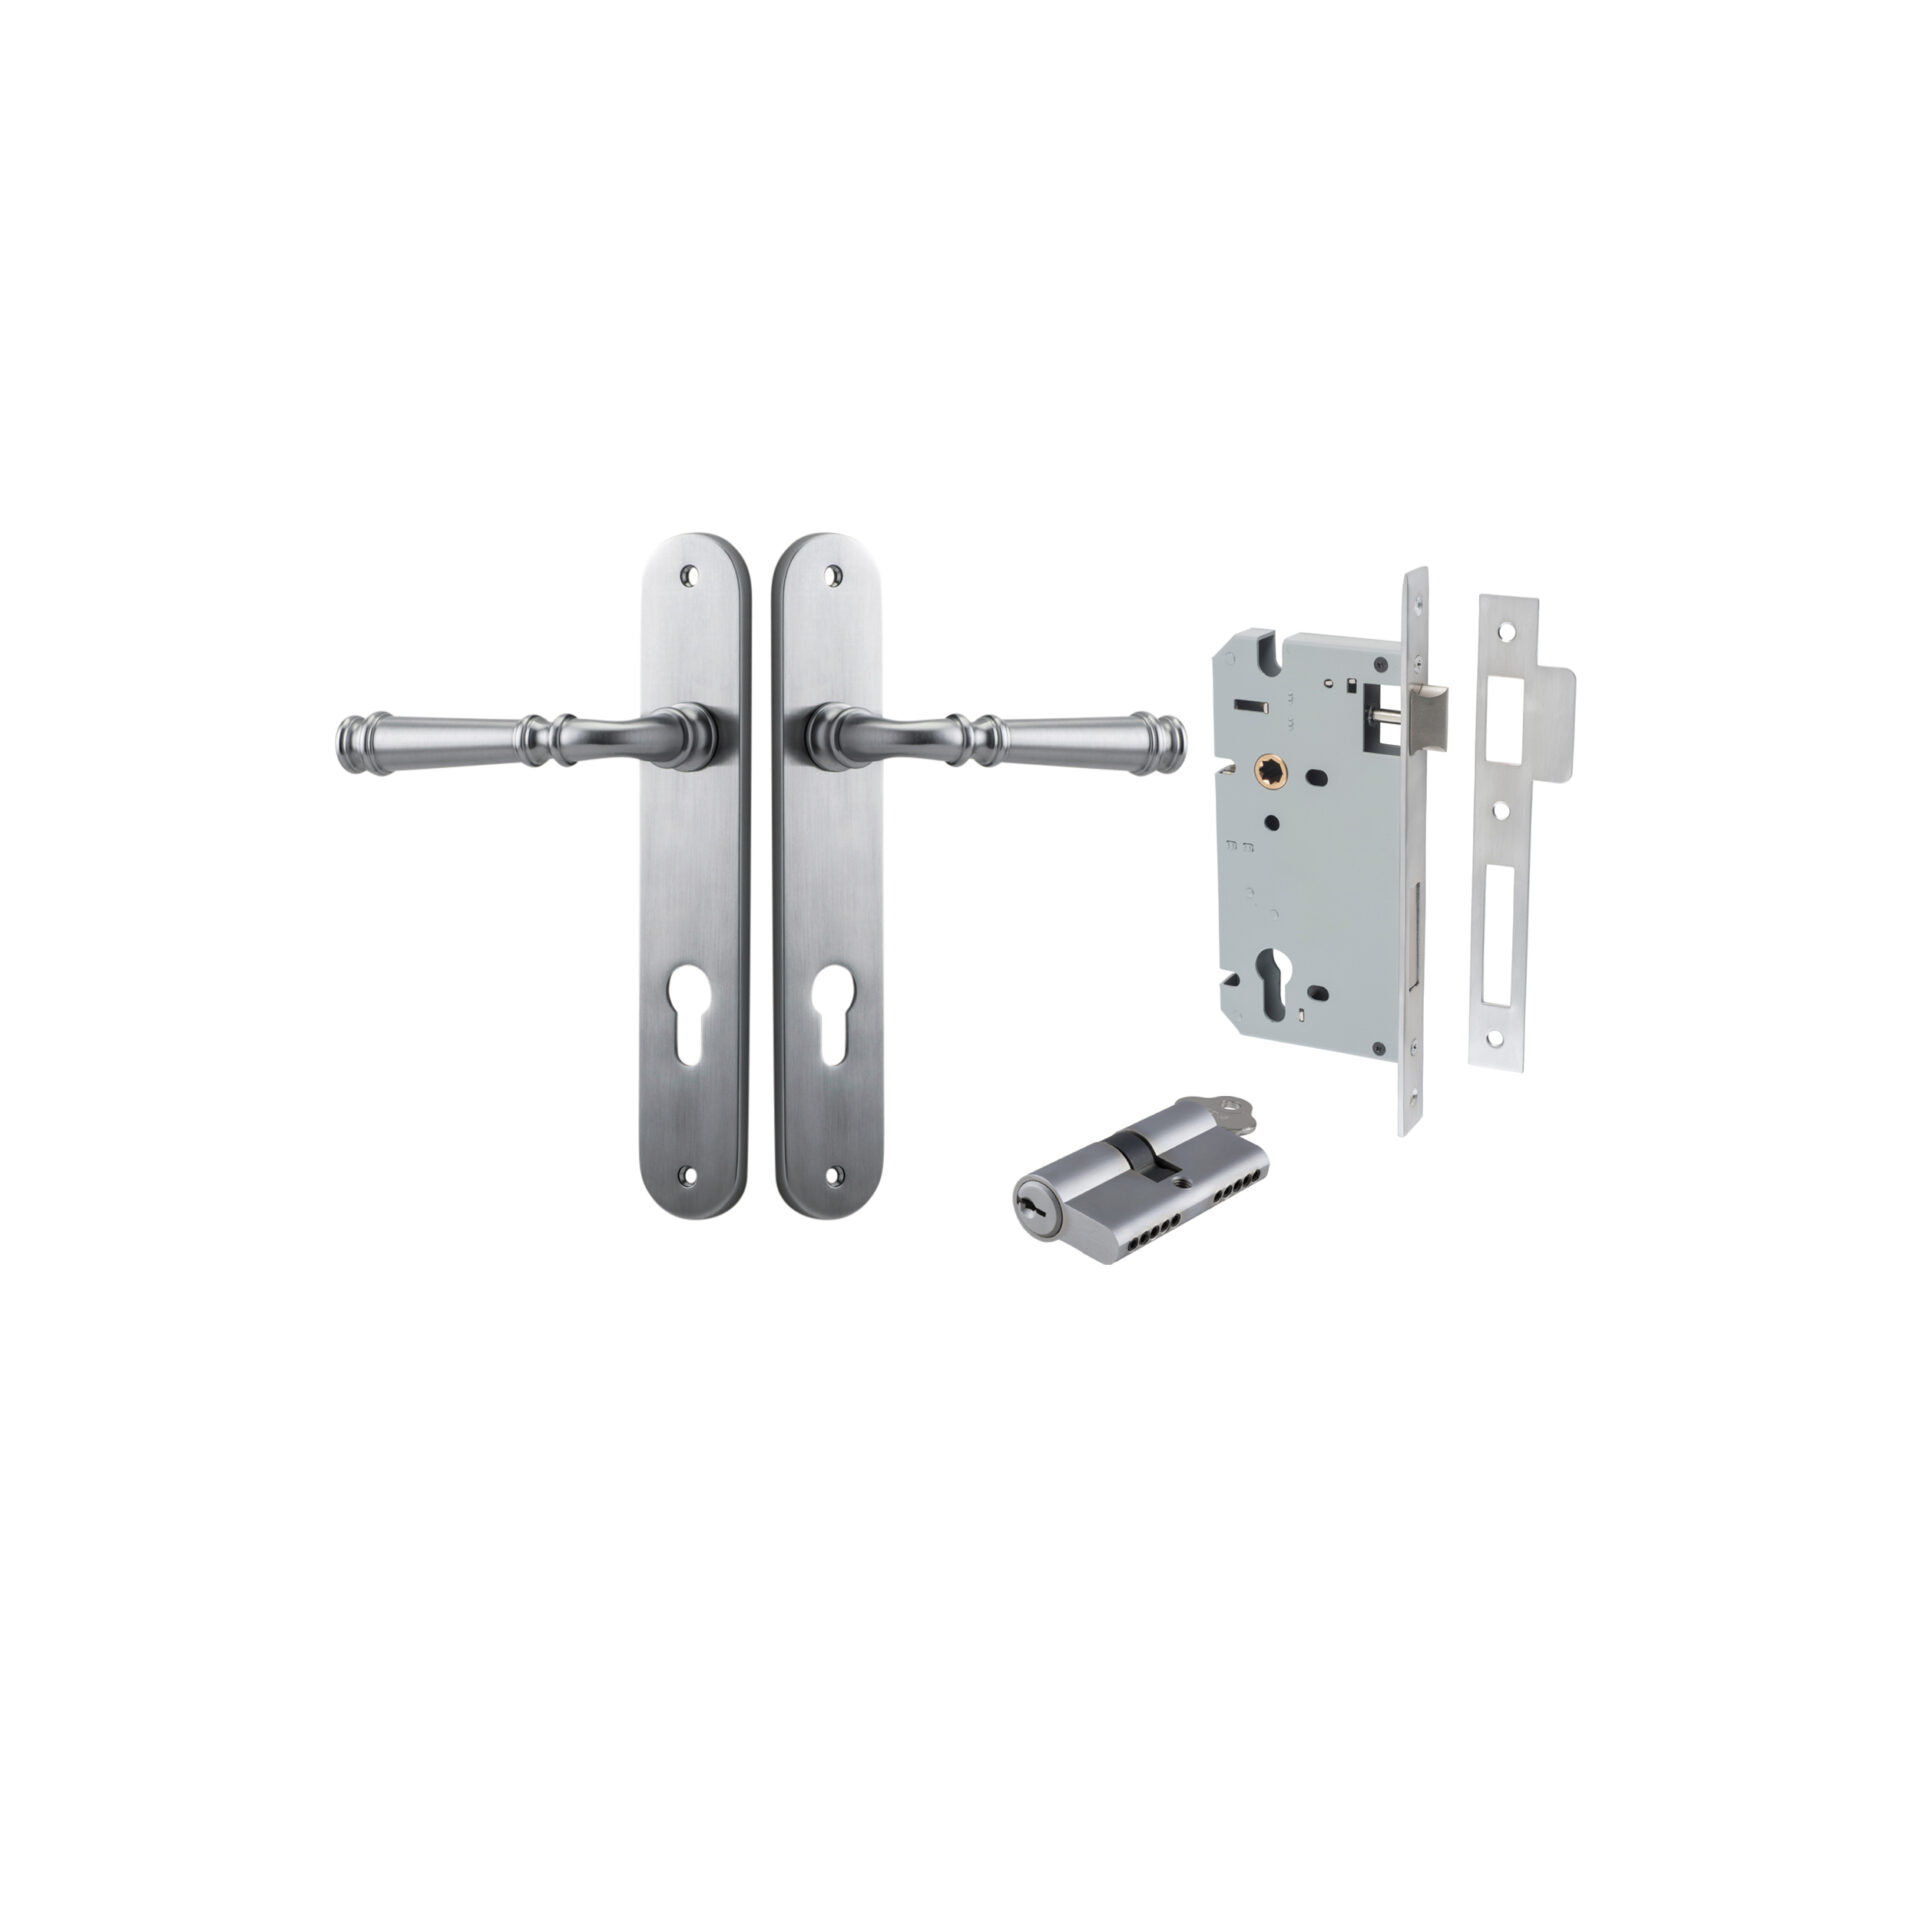 Verona Lever - Oval Backplate Entrance Kit with High Security Lock